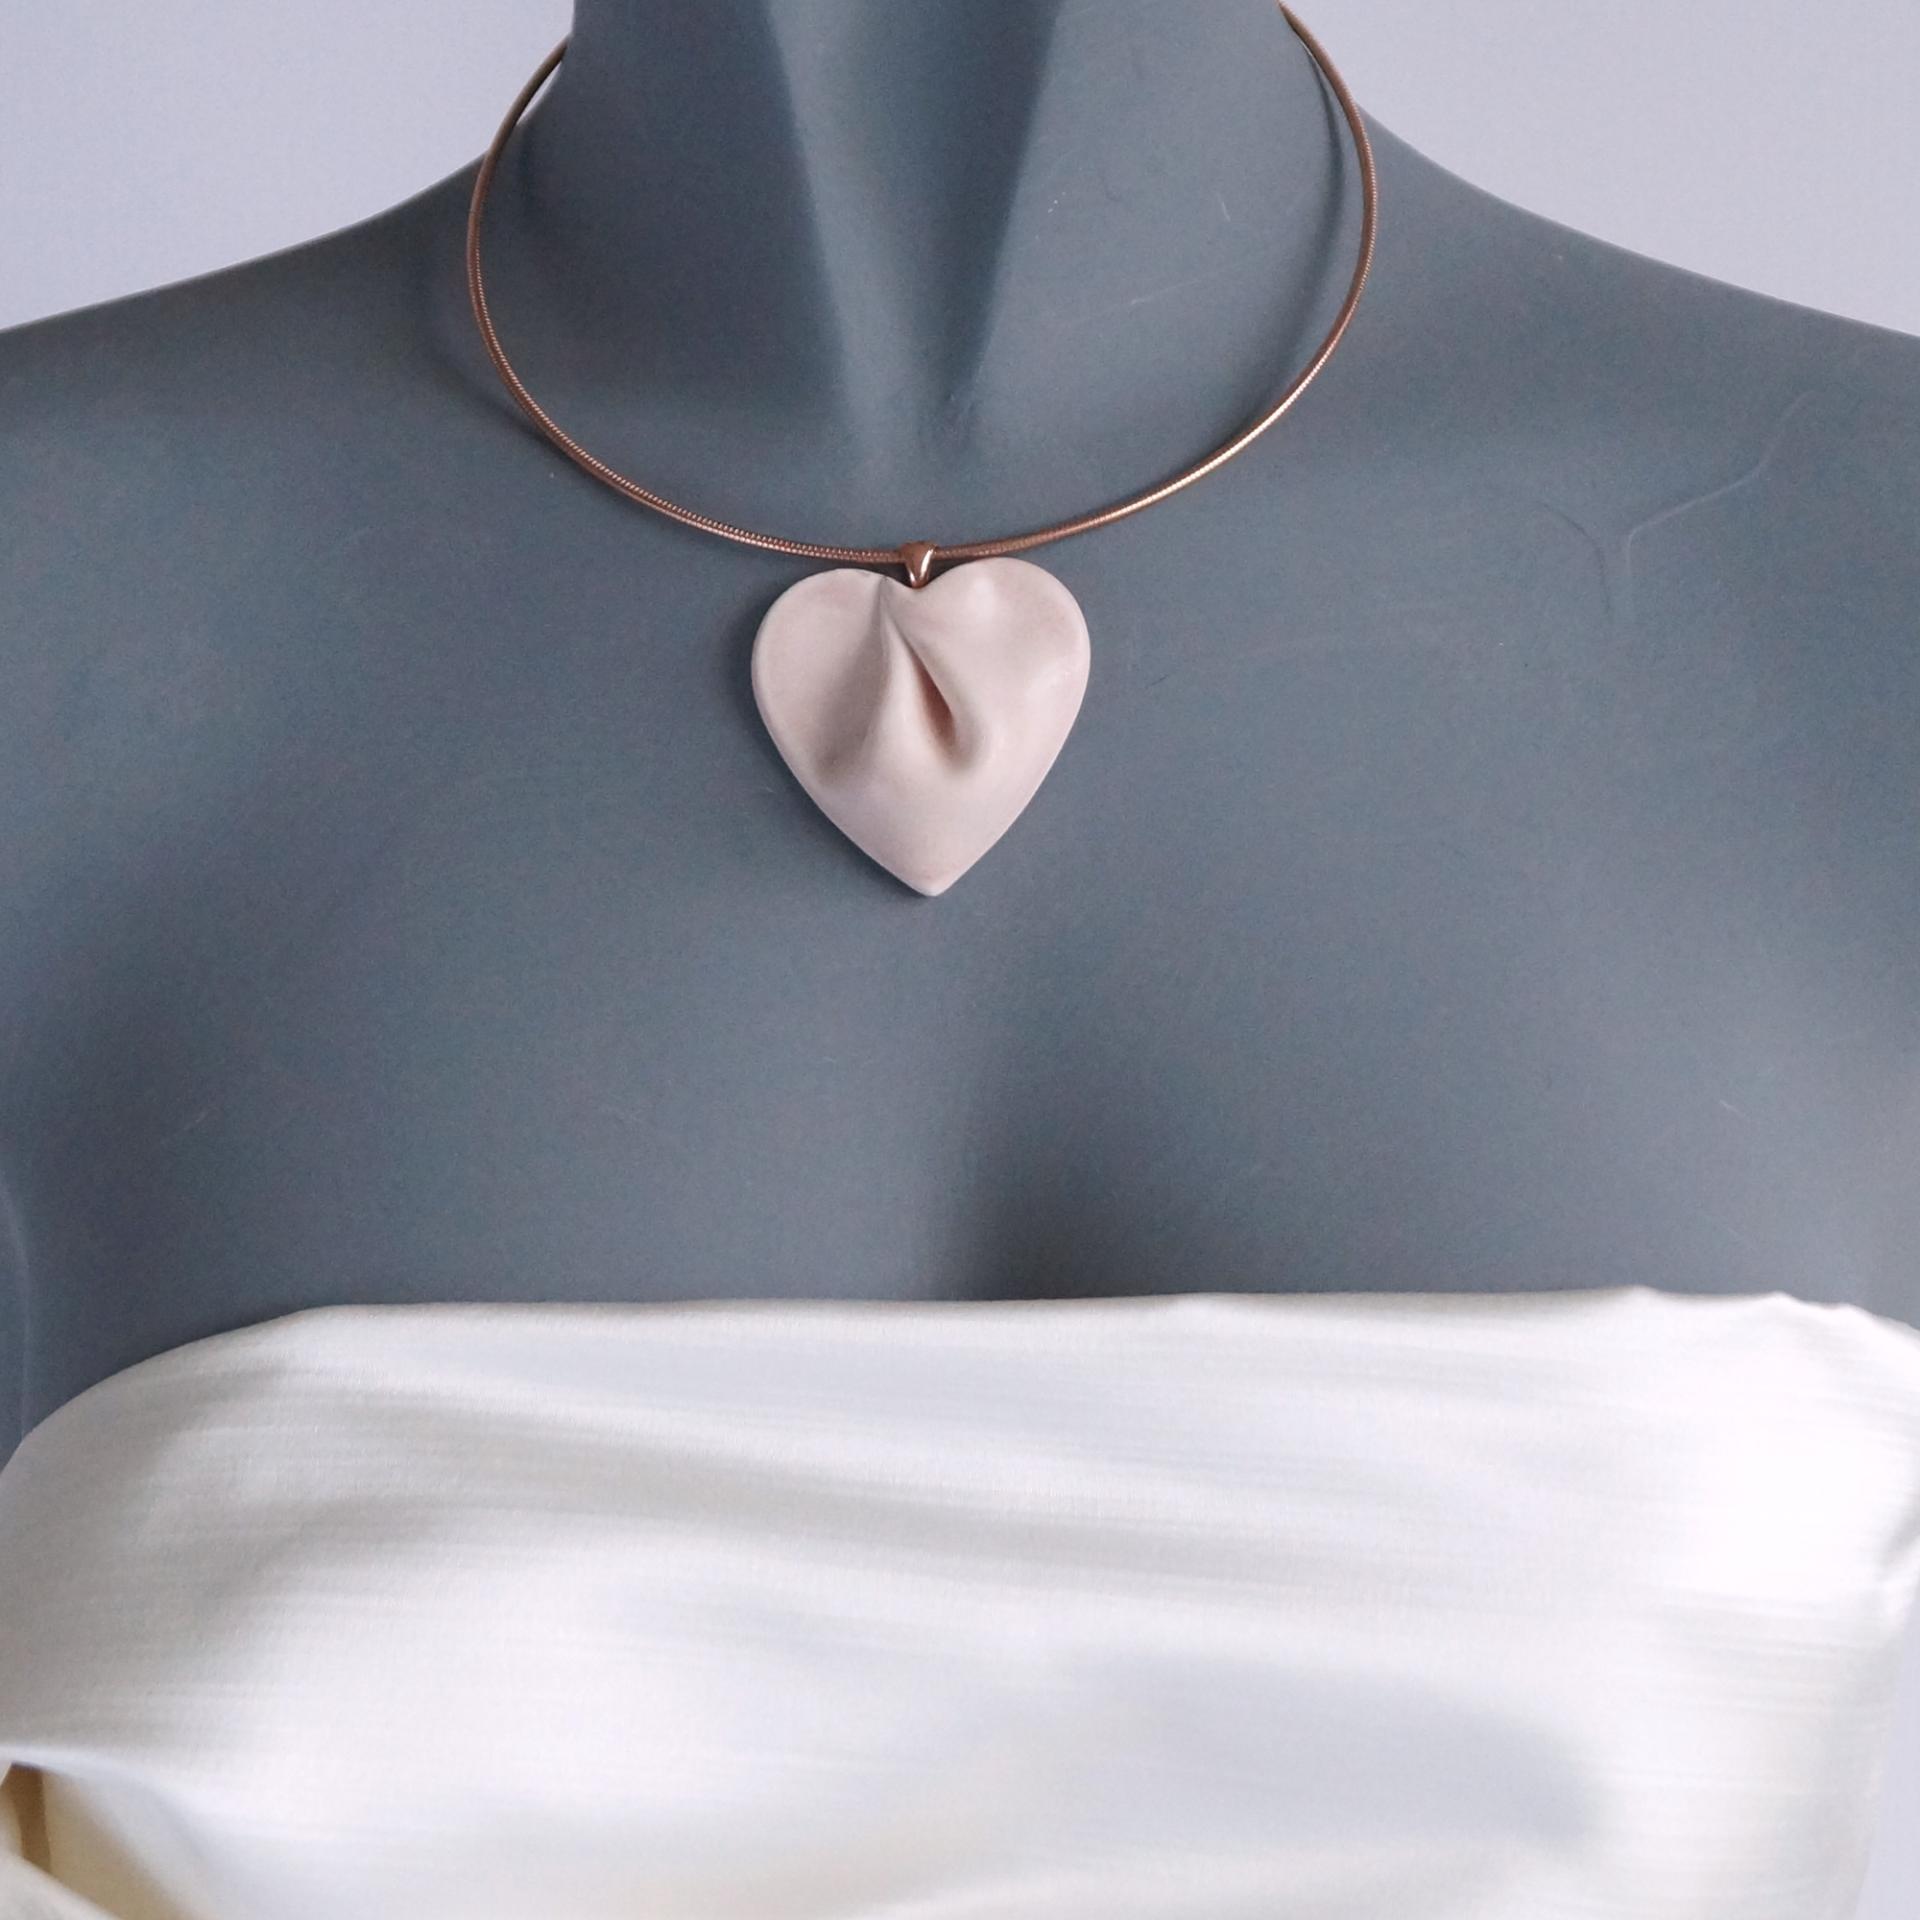 DRAPED heart necklace, large pink porcelain, choose rose gold chain